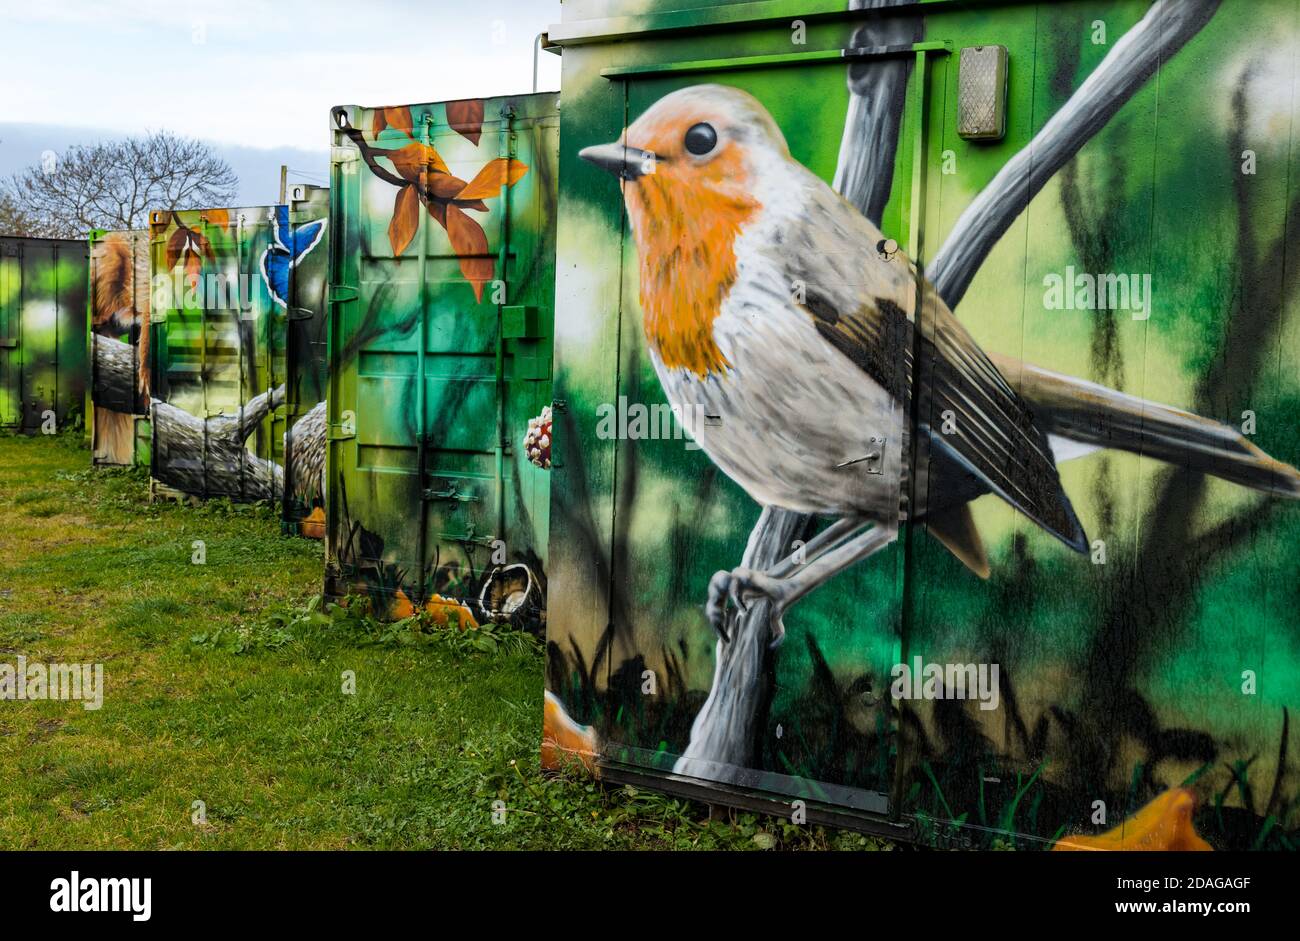 Quirky urban wildlife artwork of robin on shipping containers, Calders Community Park, Wester Hailes, Edinburgh, Scotland, UK Stock Photo